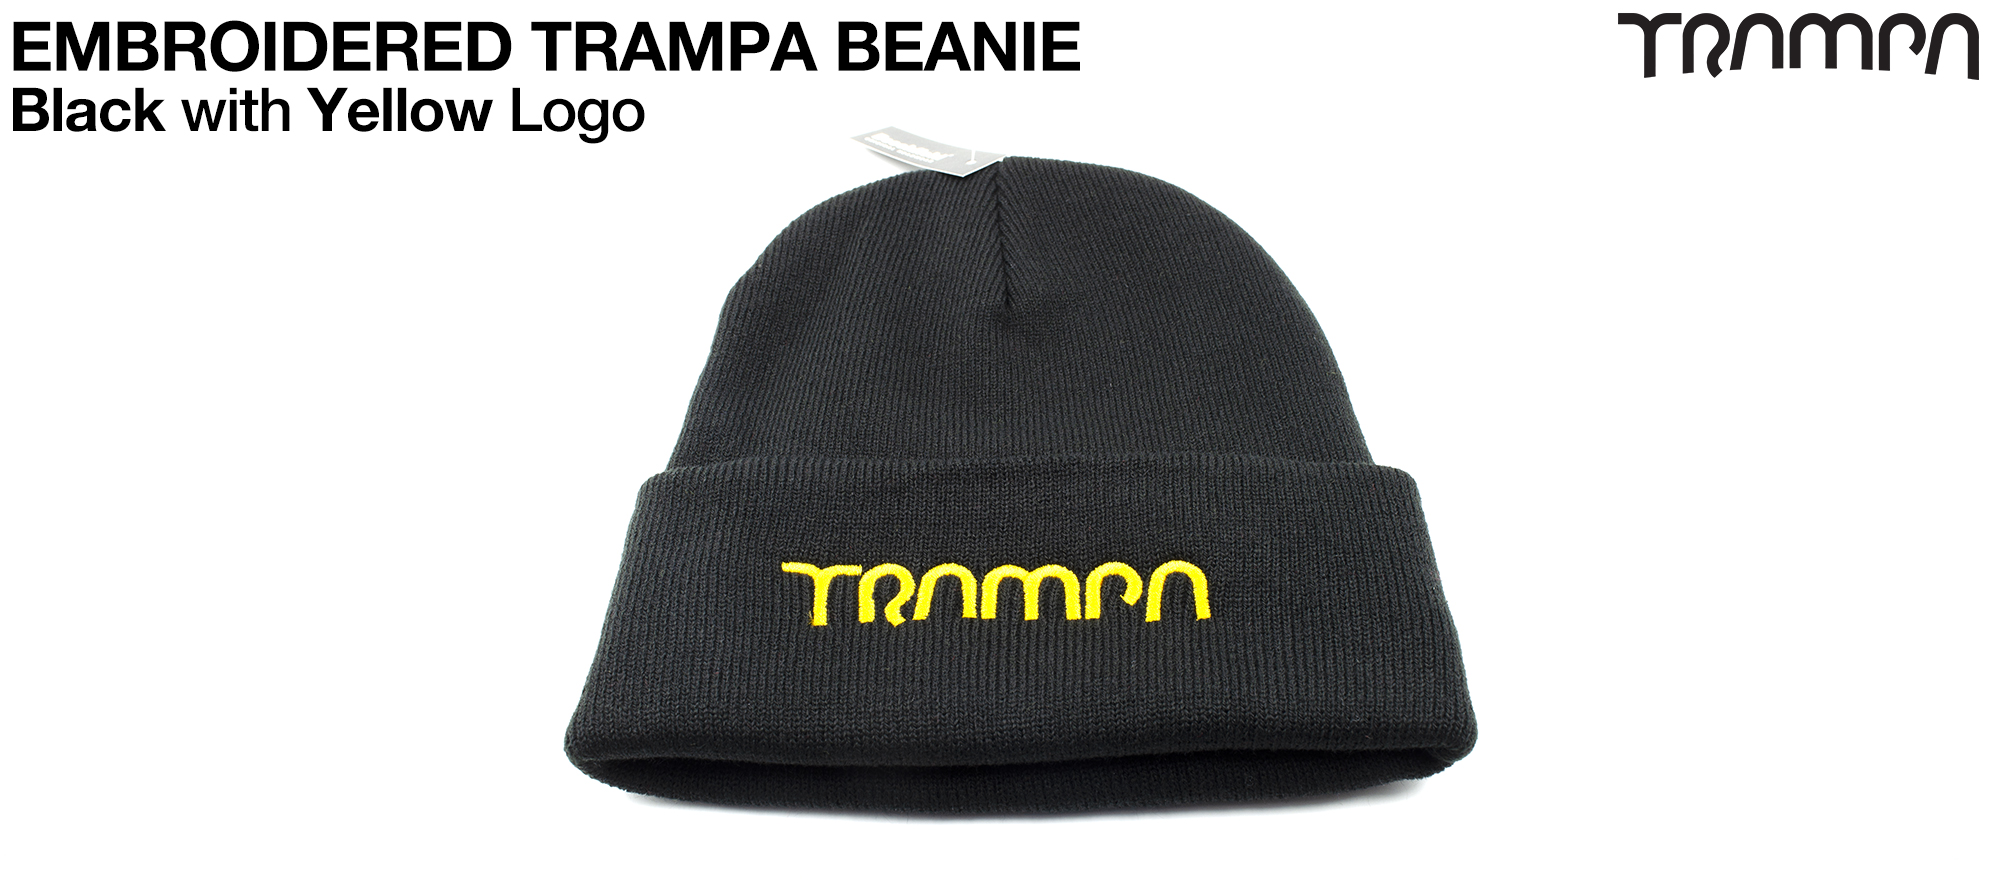 BLACK Woolie hat with YELLOW TRAMPA logo  - Double thick turn over for extra warmth 